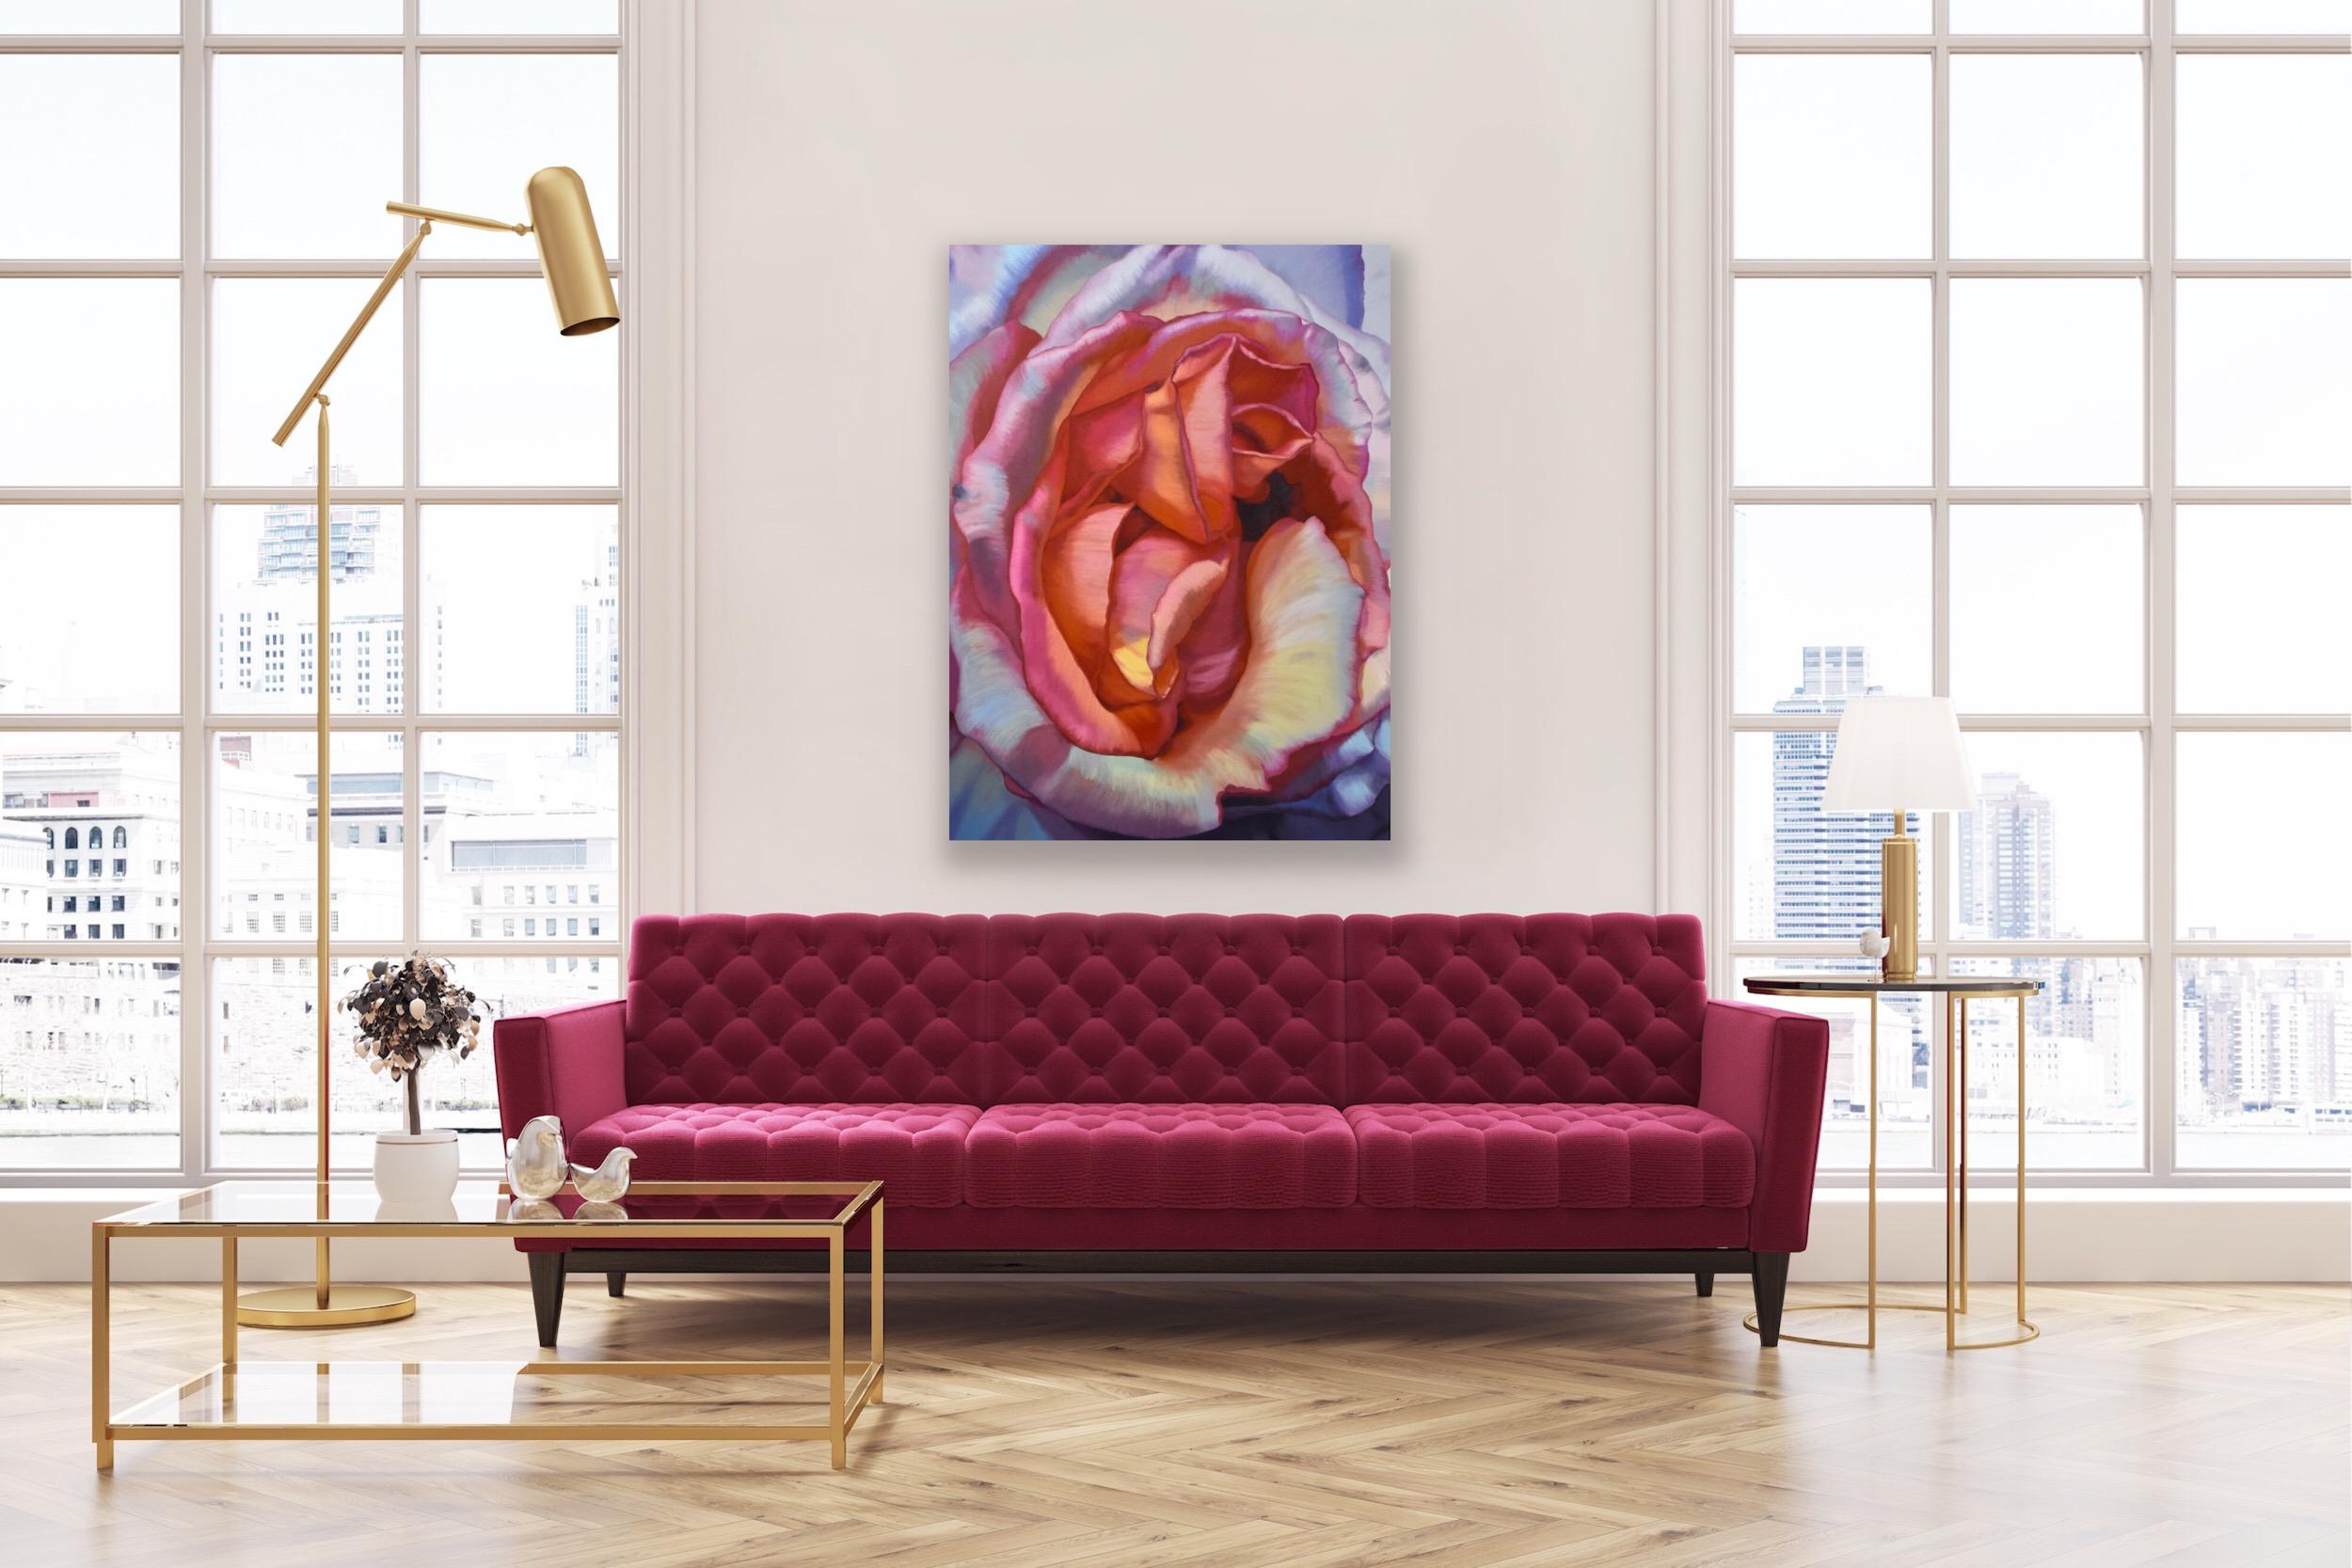 Desert Rose (floral pink rose painting realist flower oil painting canvas lilac) - Painting by Chloe Hedden